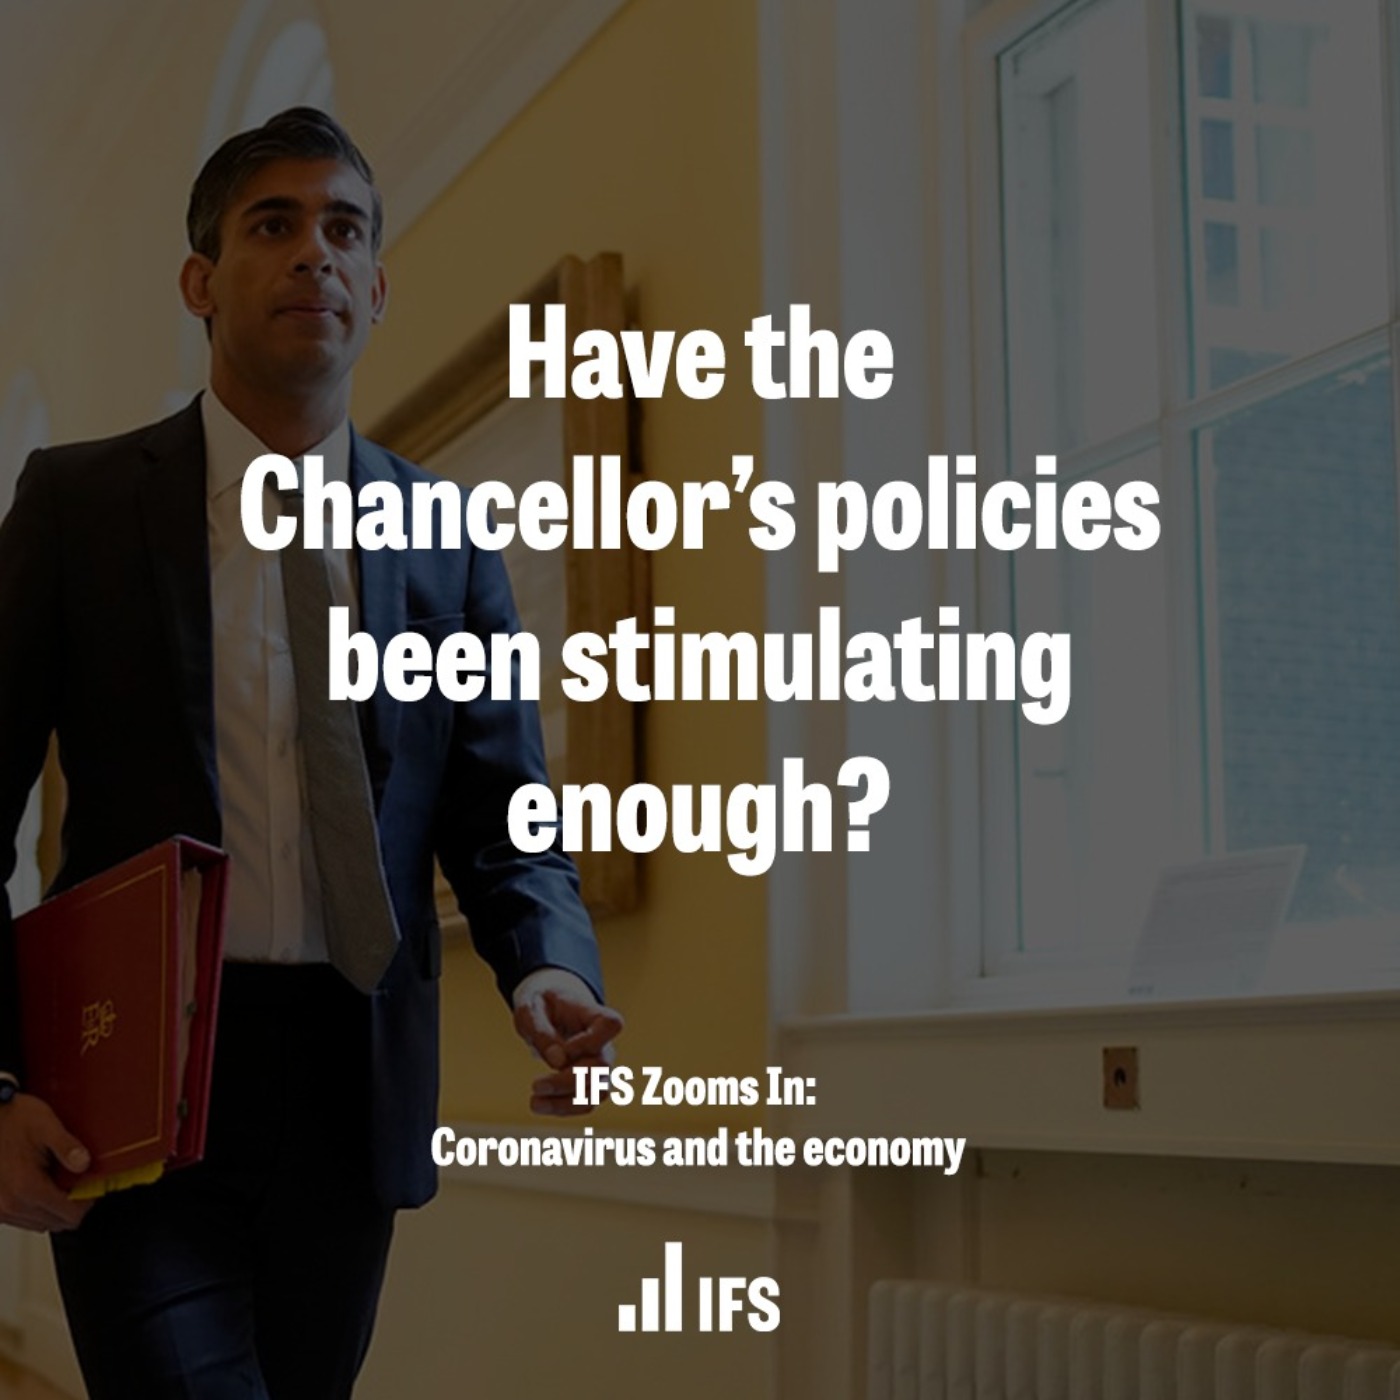 Have the Chancellor's policies been stimulating enough?